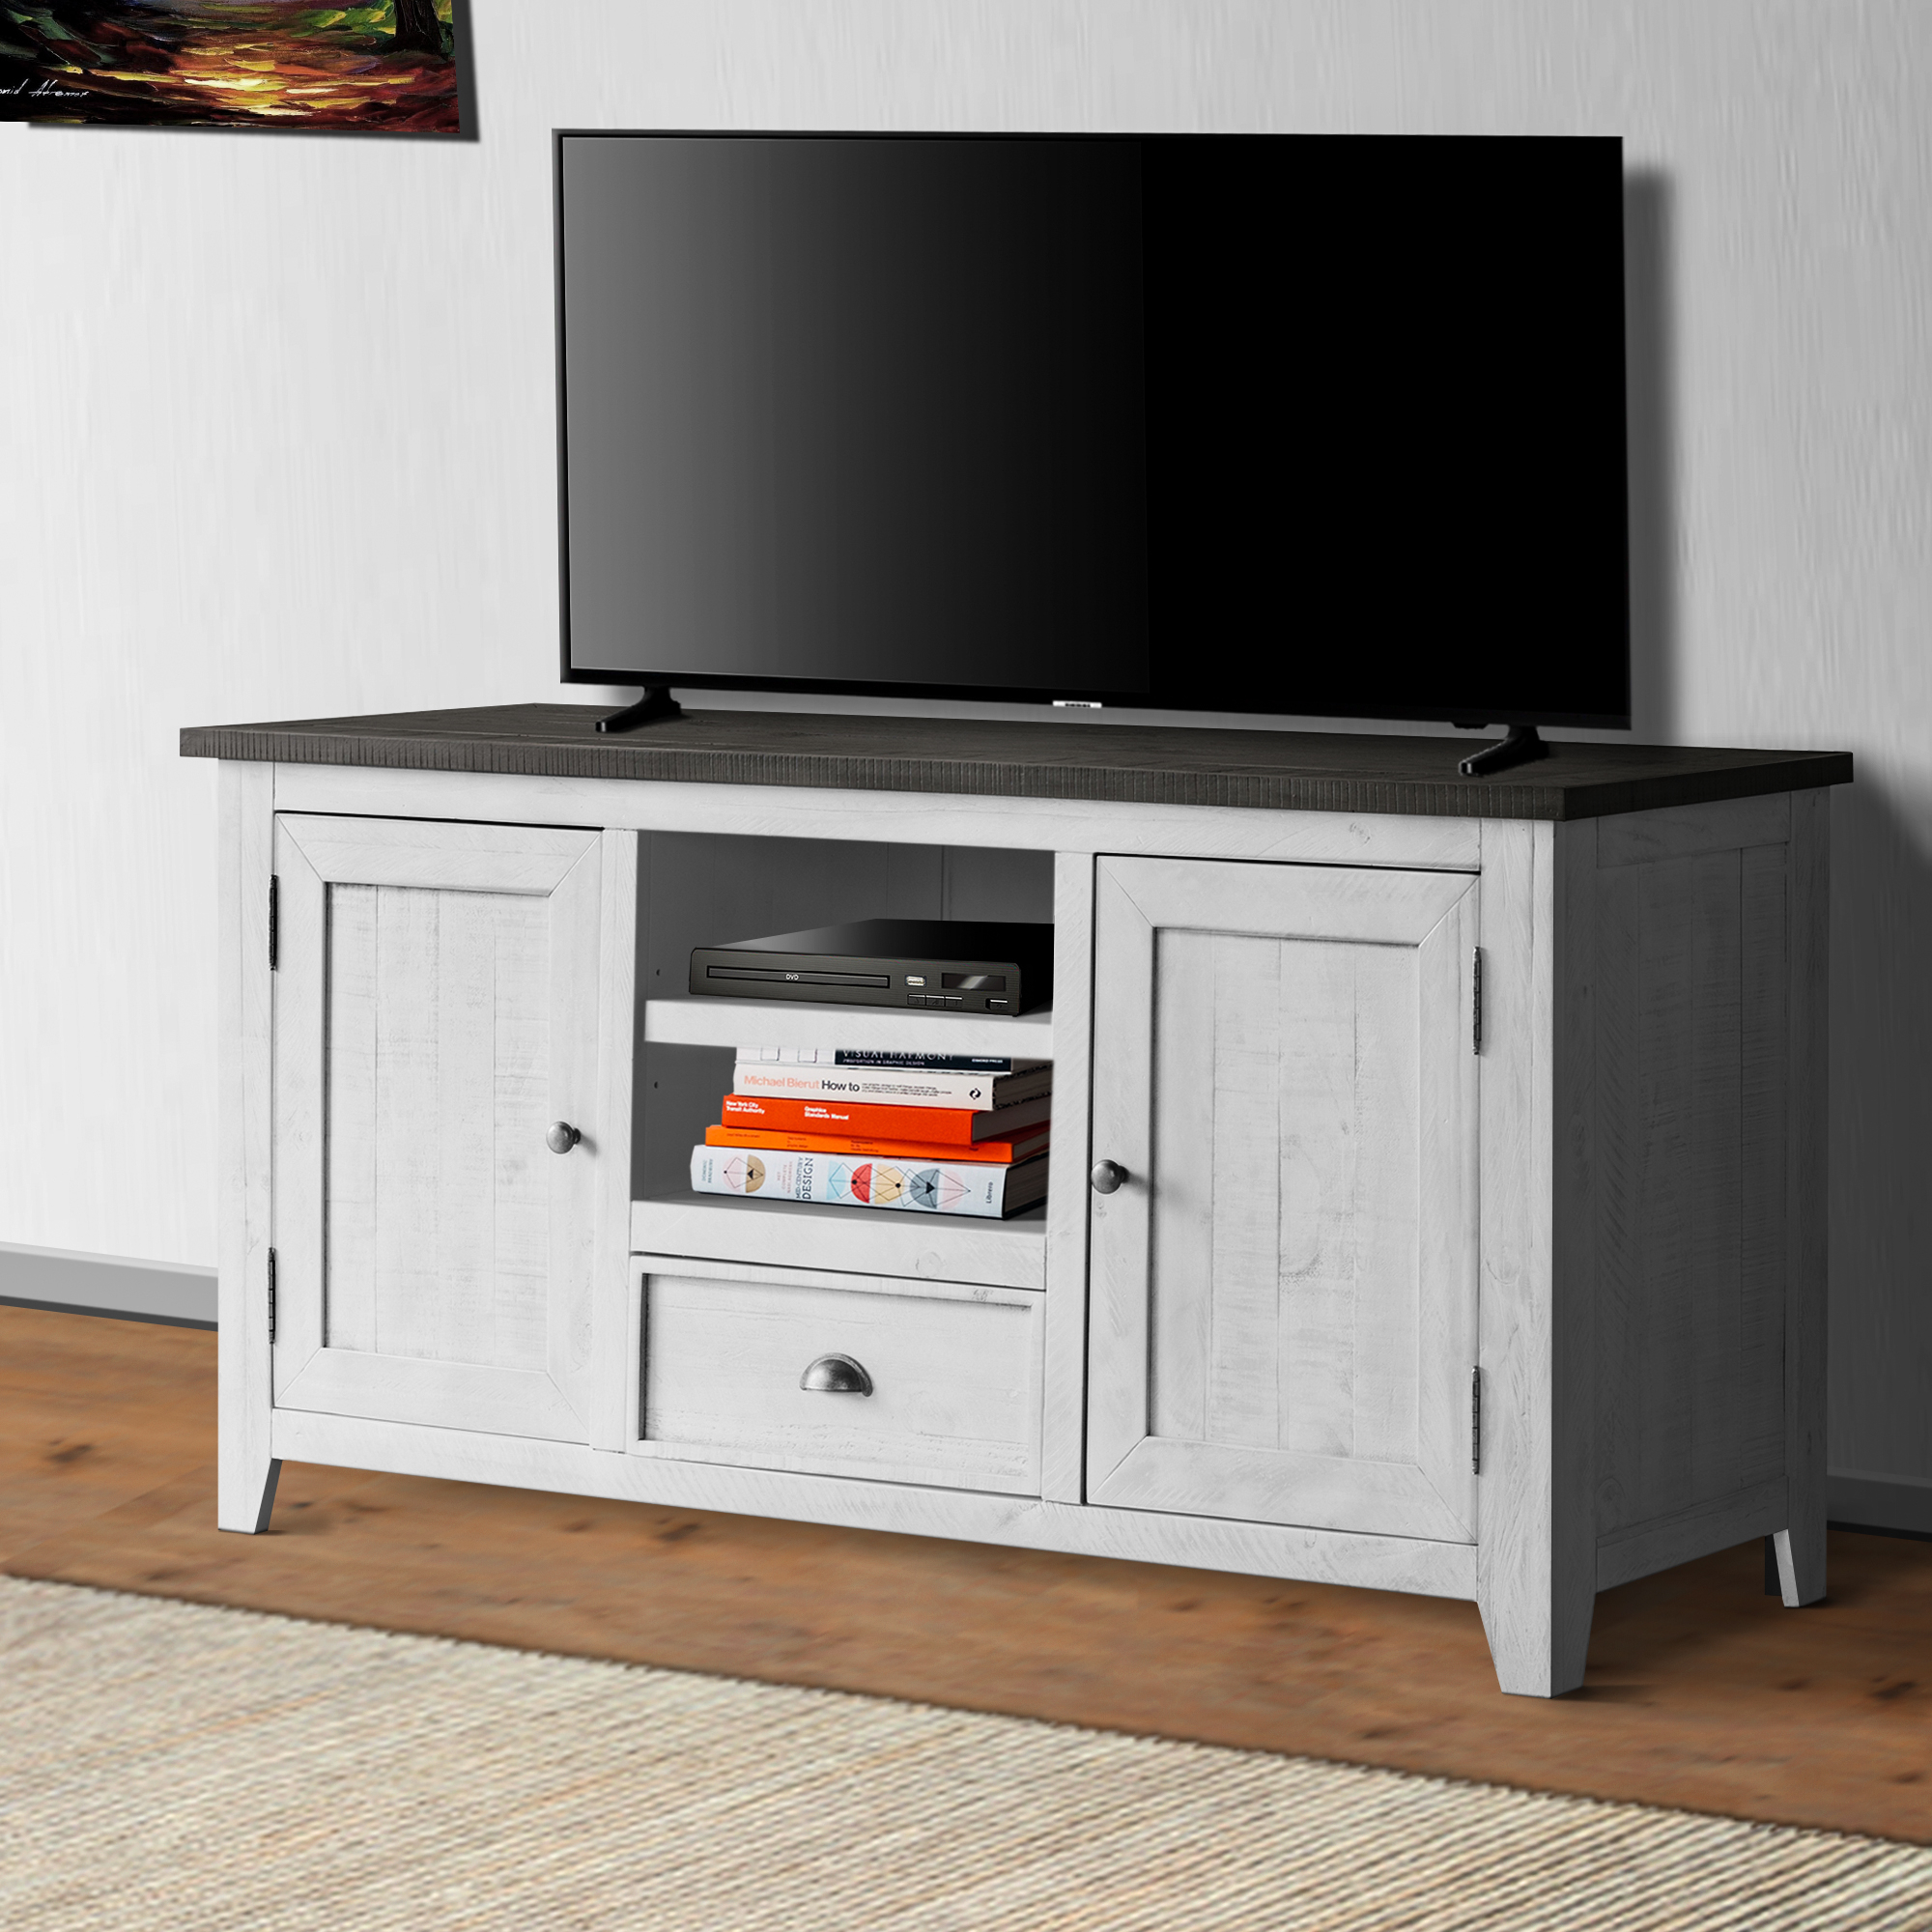 Coastal Wooden TV Stand With 2 Cabinets And 1 Drawer, White And Gray- Saltoro Sherpi